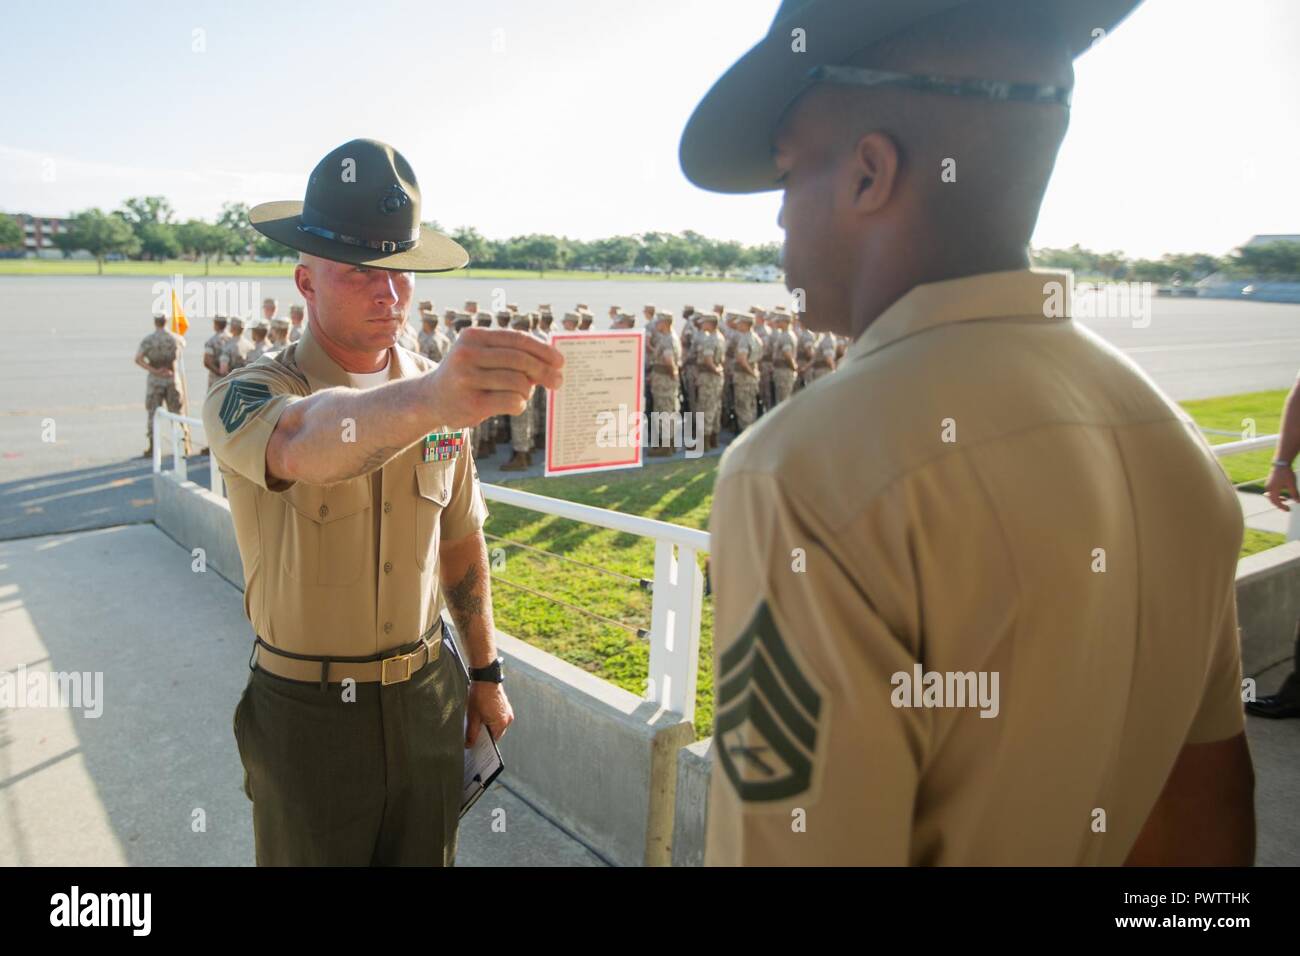 U.S. Marine Corps Staff Sgt. Wesley Paulk, the 2nd Recruit Training Battalion drillmaster, hands a list of commands to a drill instructor before an initial drill evaluation June 19, 2017, on Parris Island, S.C. Drillmasters, like Paulk, 31, from Baton Rouge, La., are experts on the Marine Corps Drill and Ceremonies Manual and grade each platoon and its drill instructor on their ability to perform close-order drill movements. Alpha Company is scheduled to graduate Aug. 11, 2017. Parris Island has been the site of Marine Corps recruit training since Nov. 1, 1915. Today, approximately 19,000 recr Stock Photo